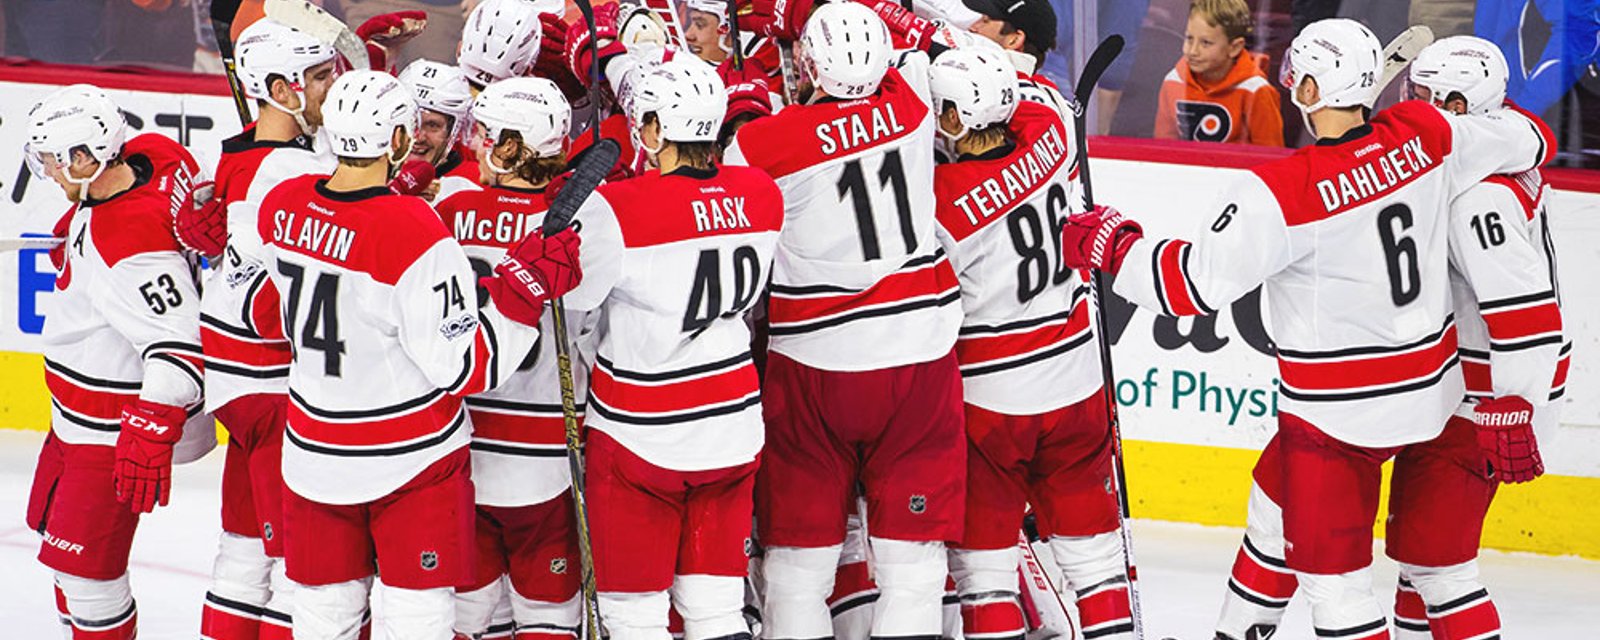 Report: Deal in place for sale of Hurricanes